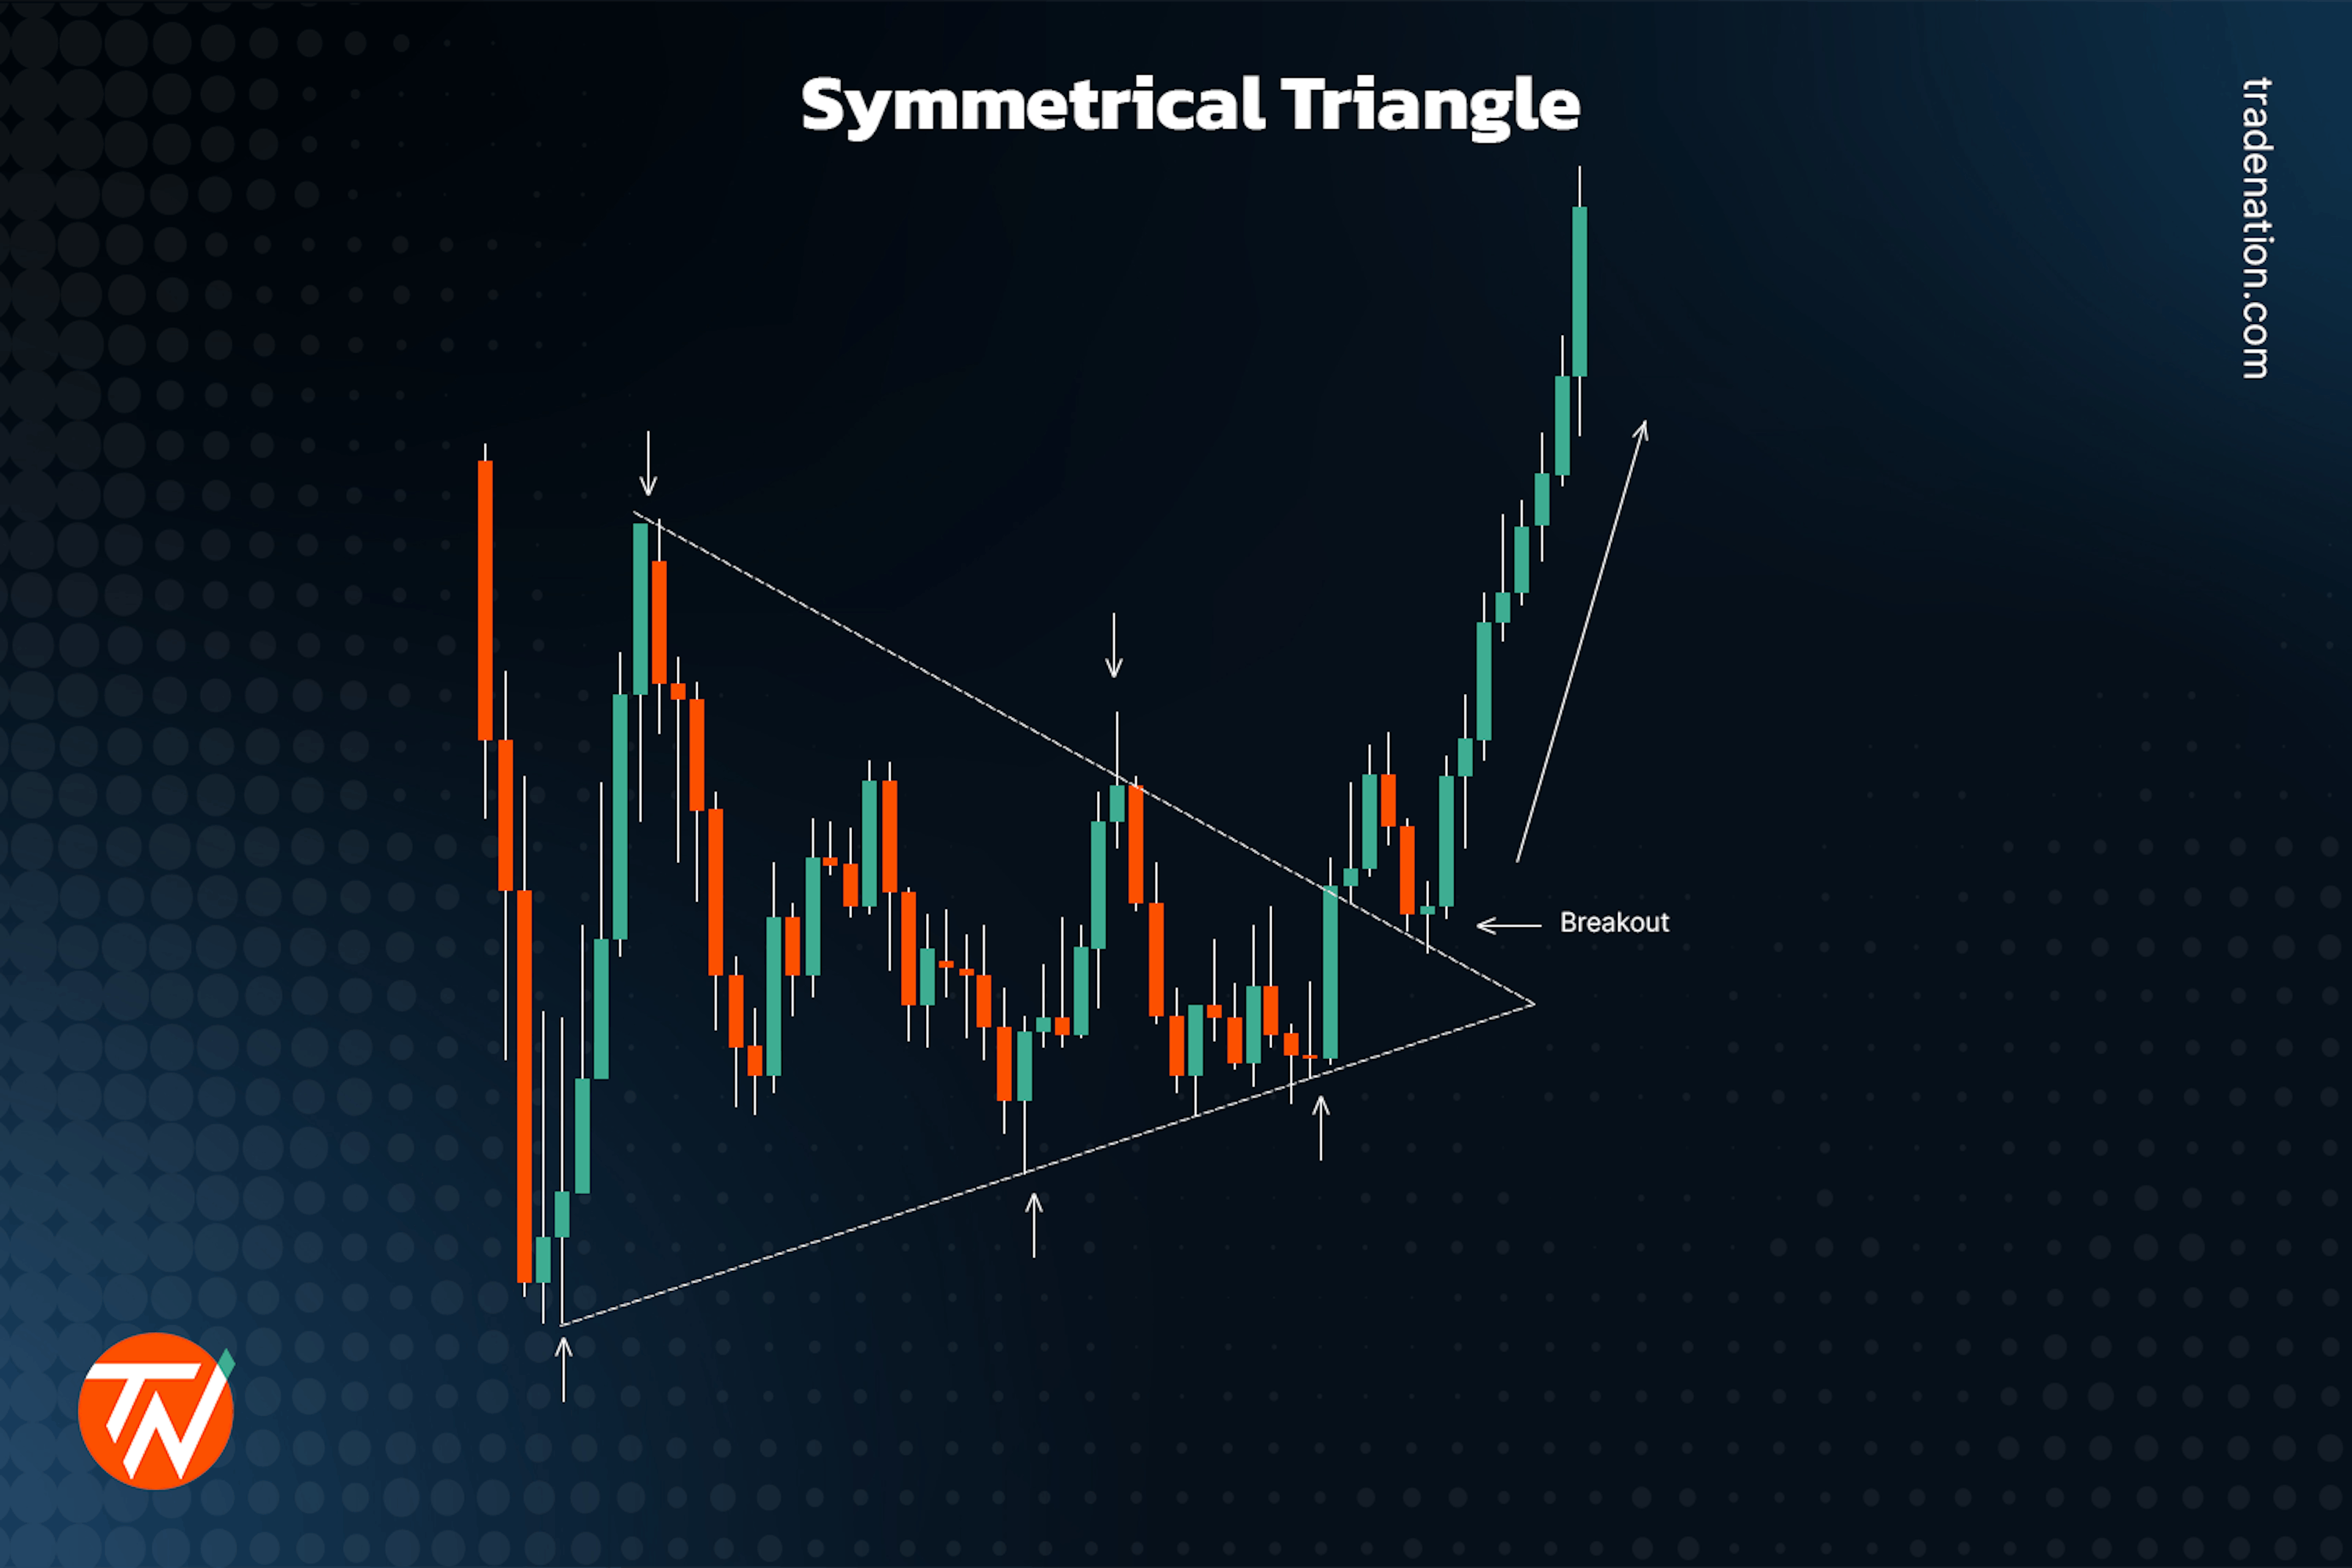 Symmetrical triangle in trading